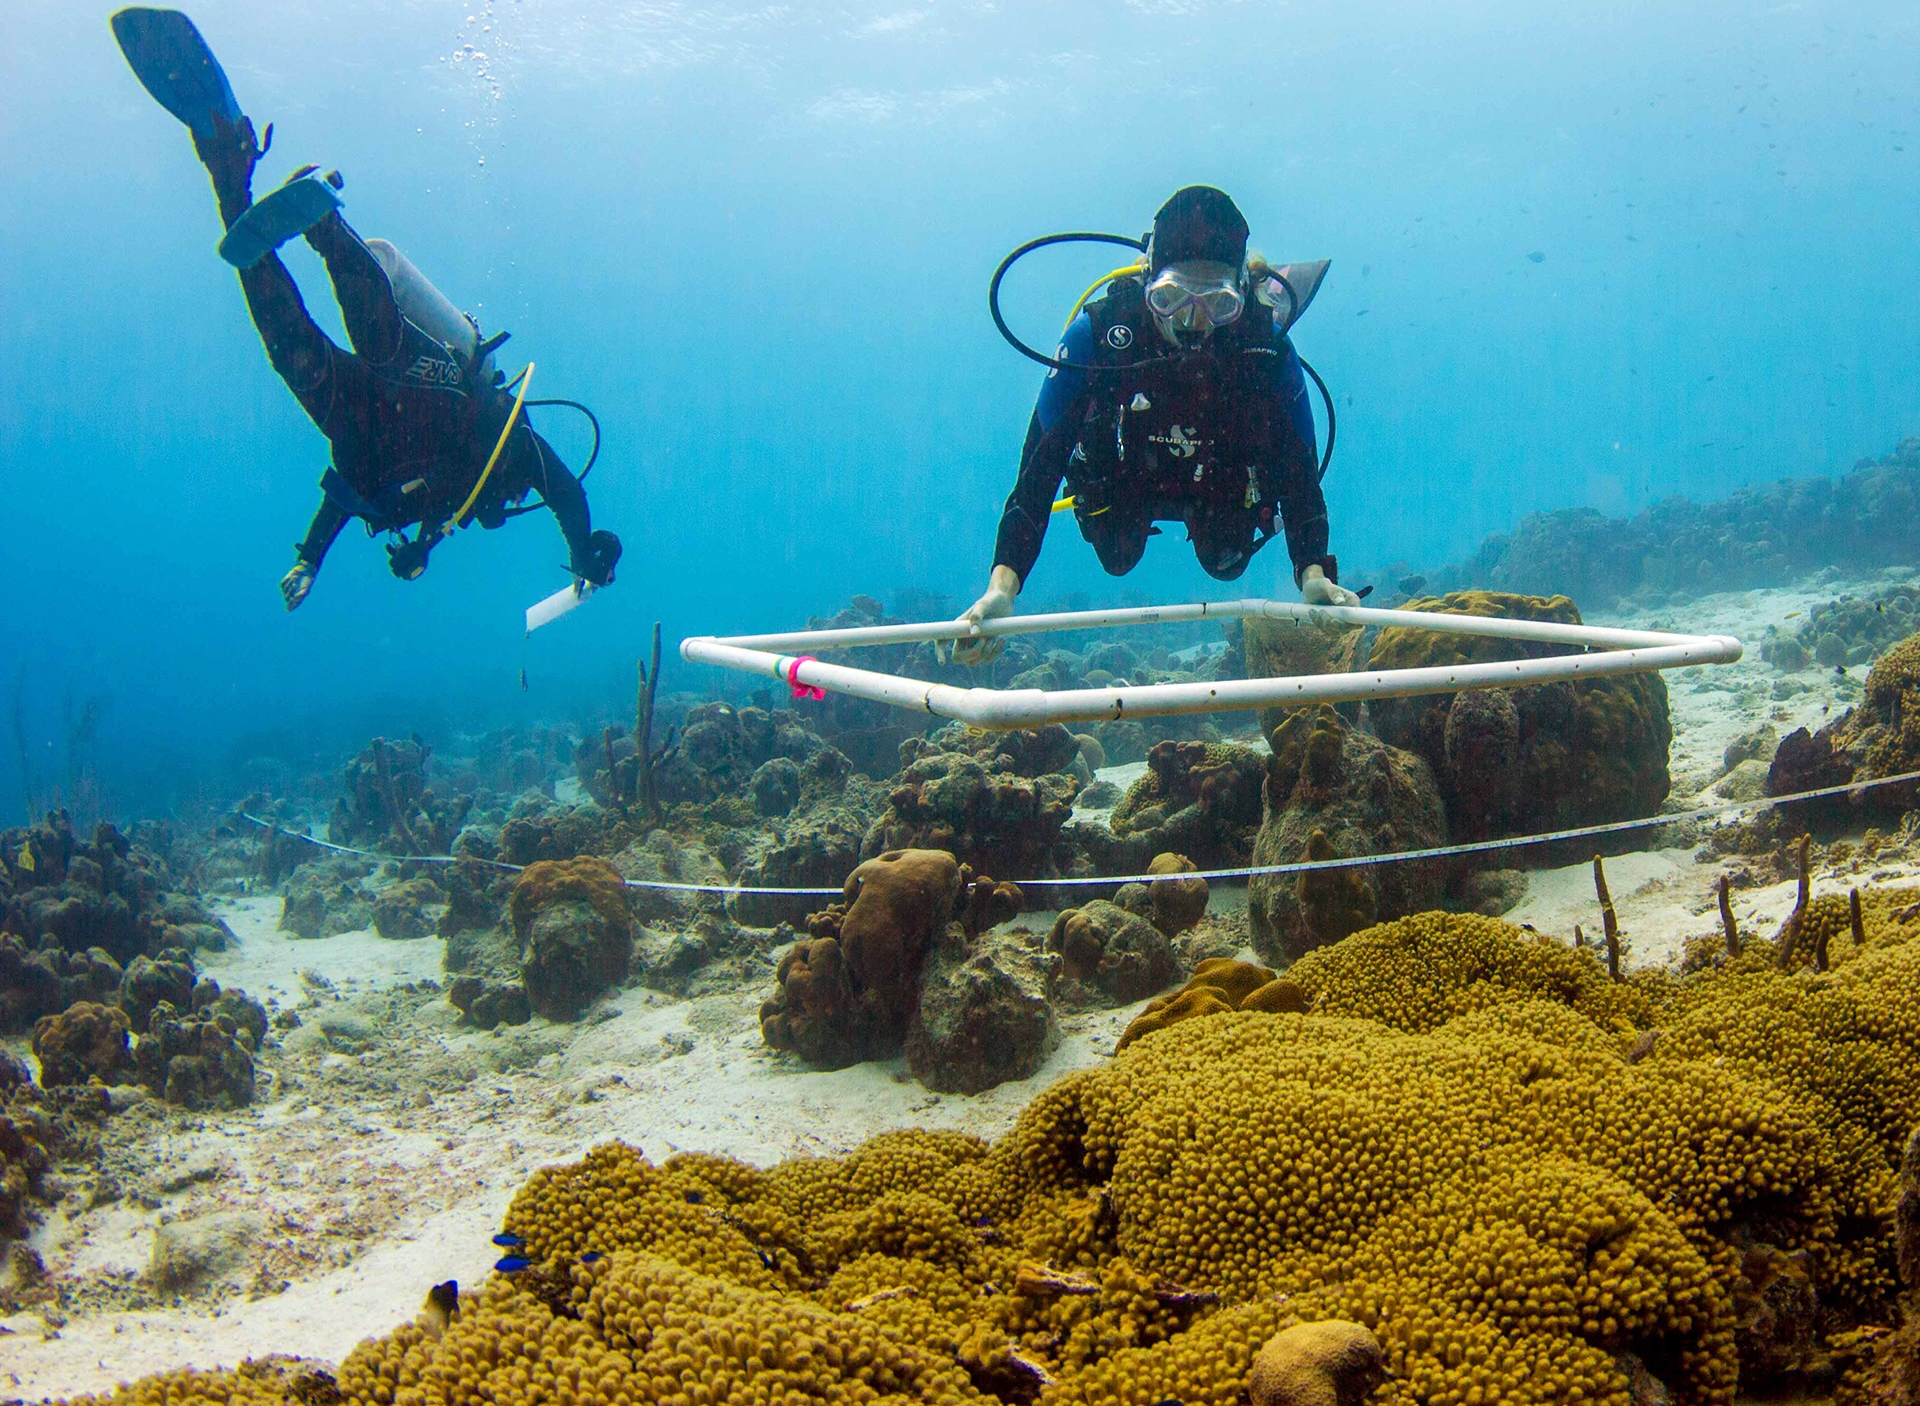 6 Monitoring coral cover, photo SECORE International (c) 